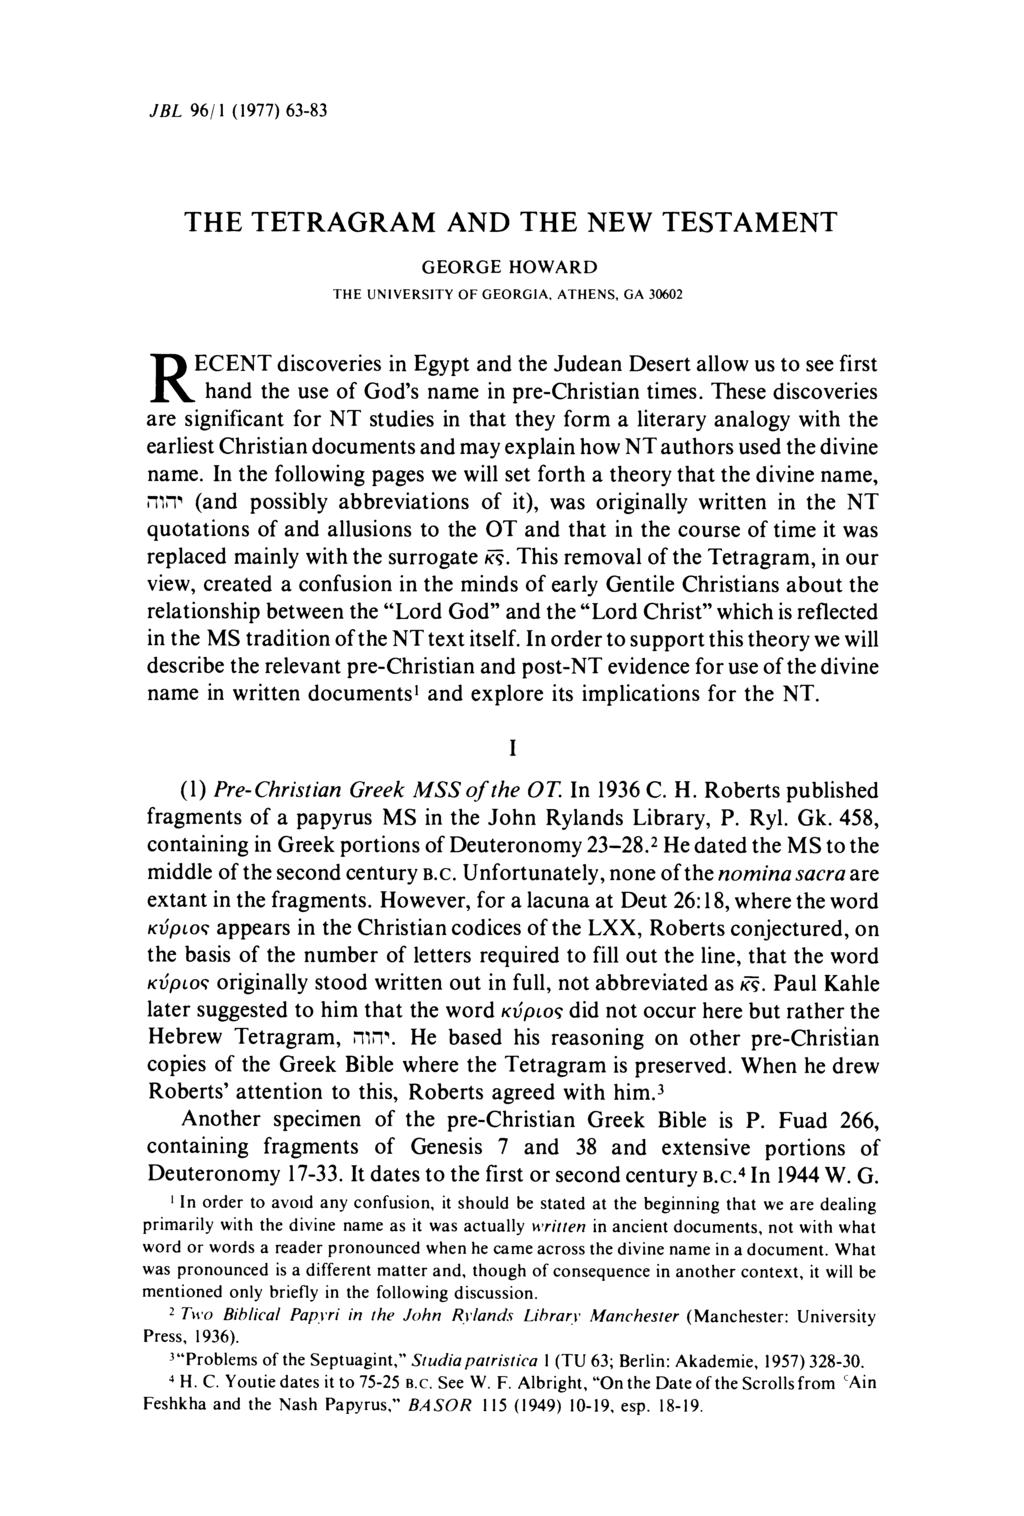 JBL 96/1 (1977) 63-83 THE TETRAGRAM AND THE NEW TESTAMENT GEORGE HOWARD THE UNIVERSITY OF GEORGIA, ATHENS, GA 30602 ECENT discoveries in Egypt and the Judean Desert allow us to see first R hand the